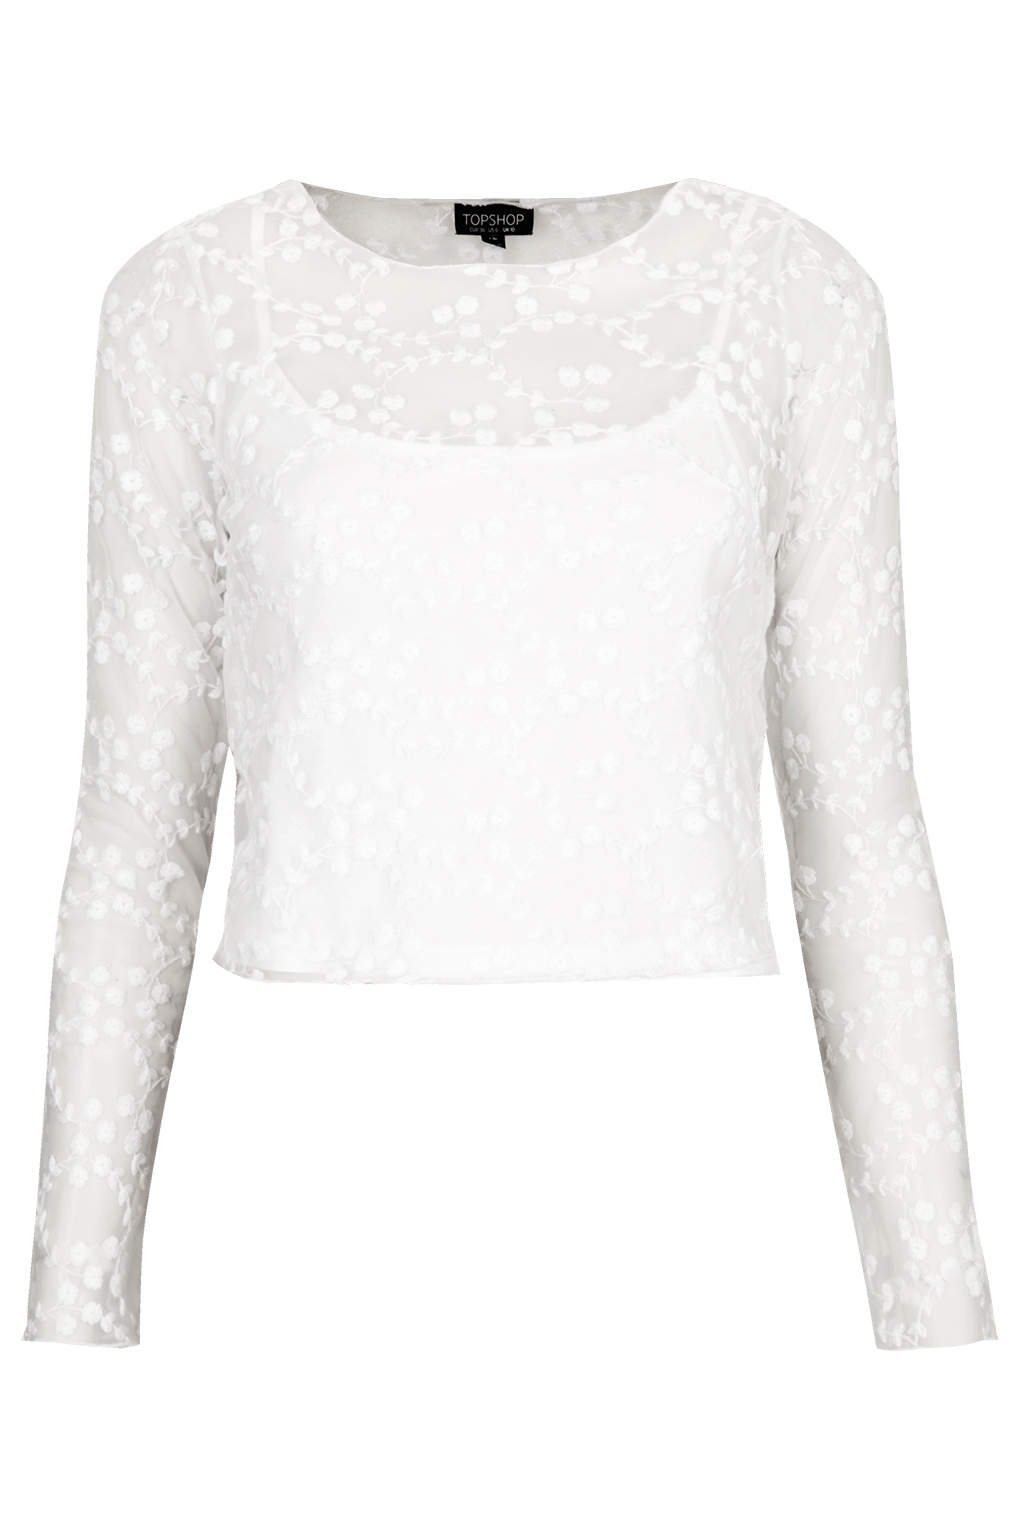 TOPSHOP Flower Embroidered Mesh Top in White - Lyst